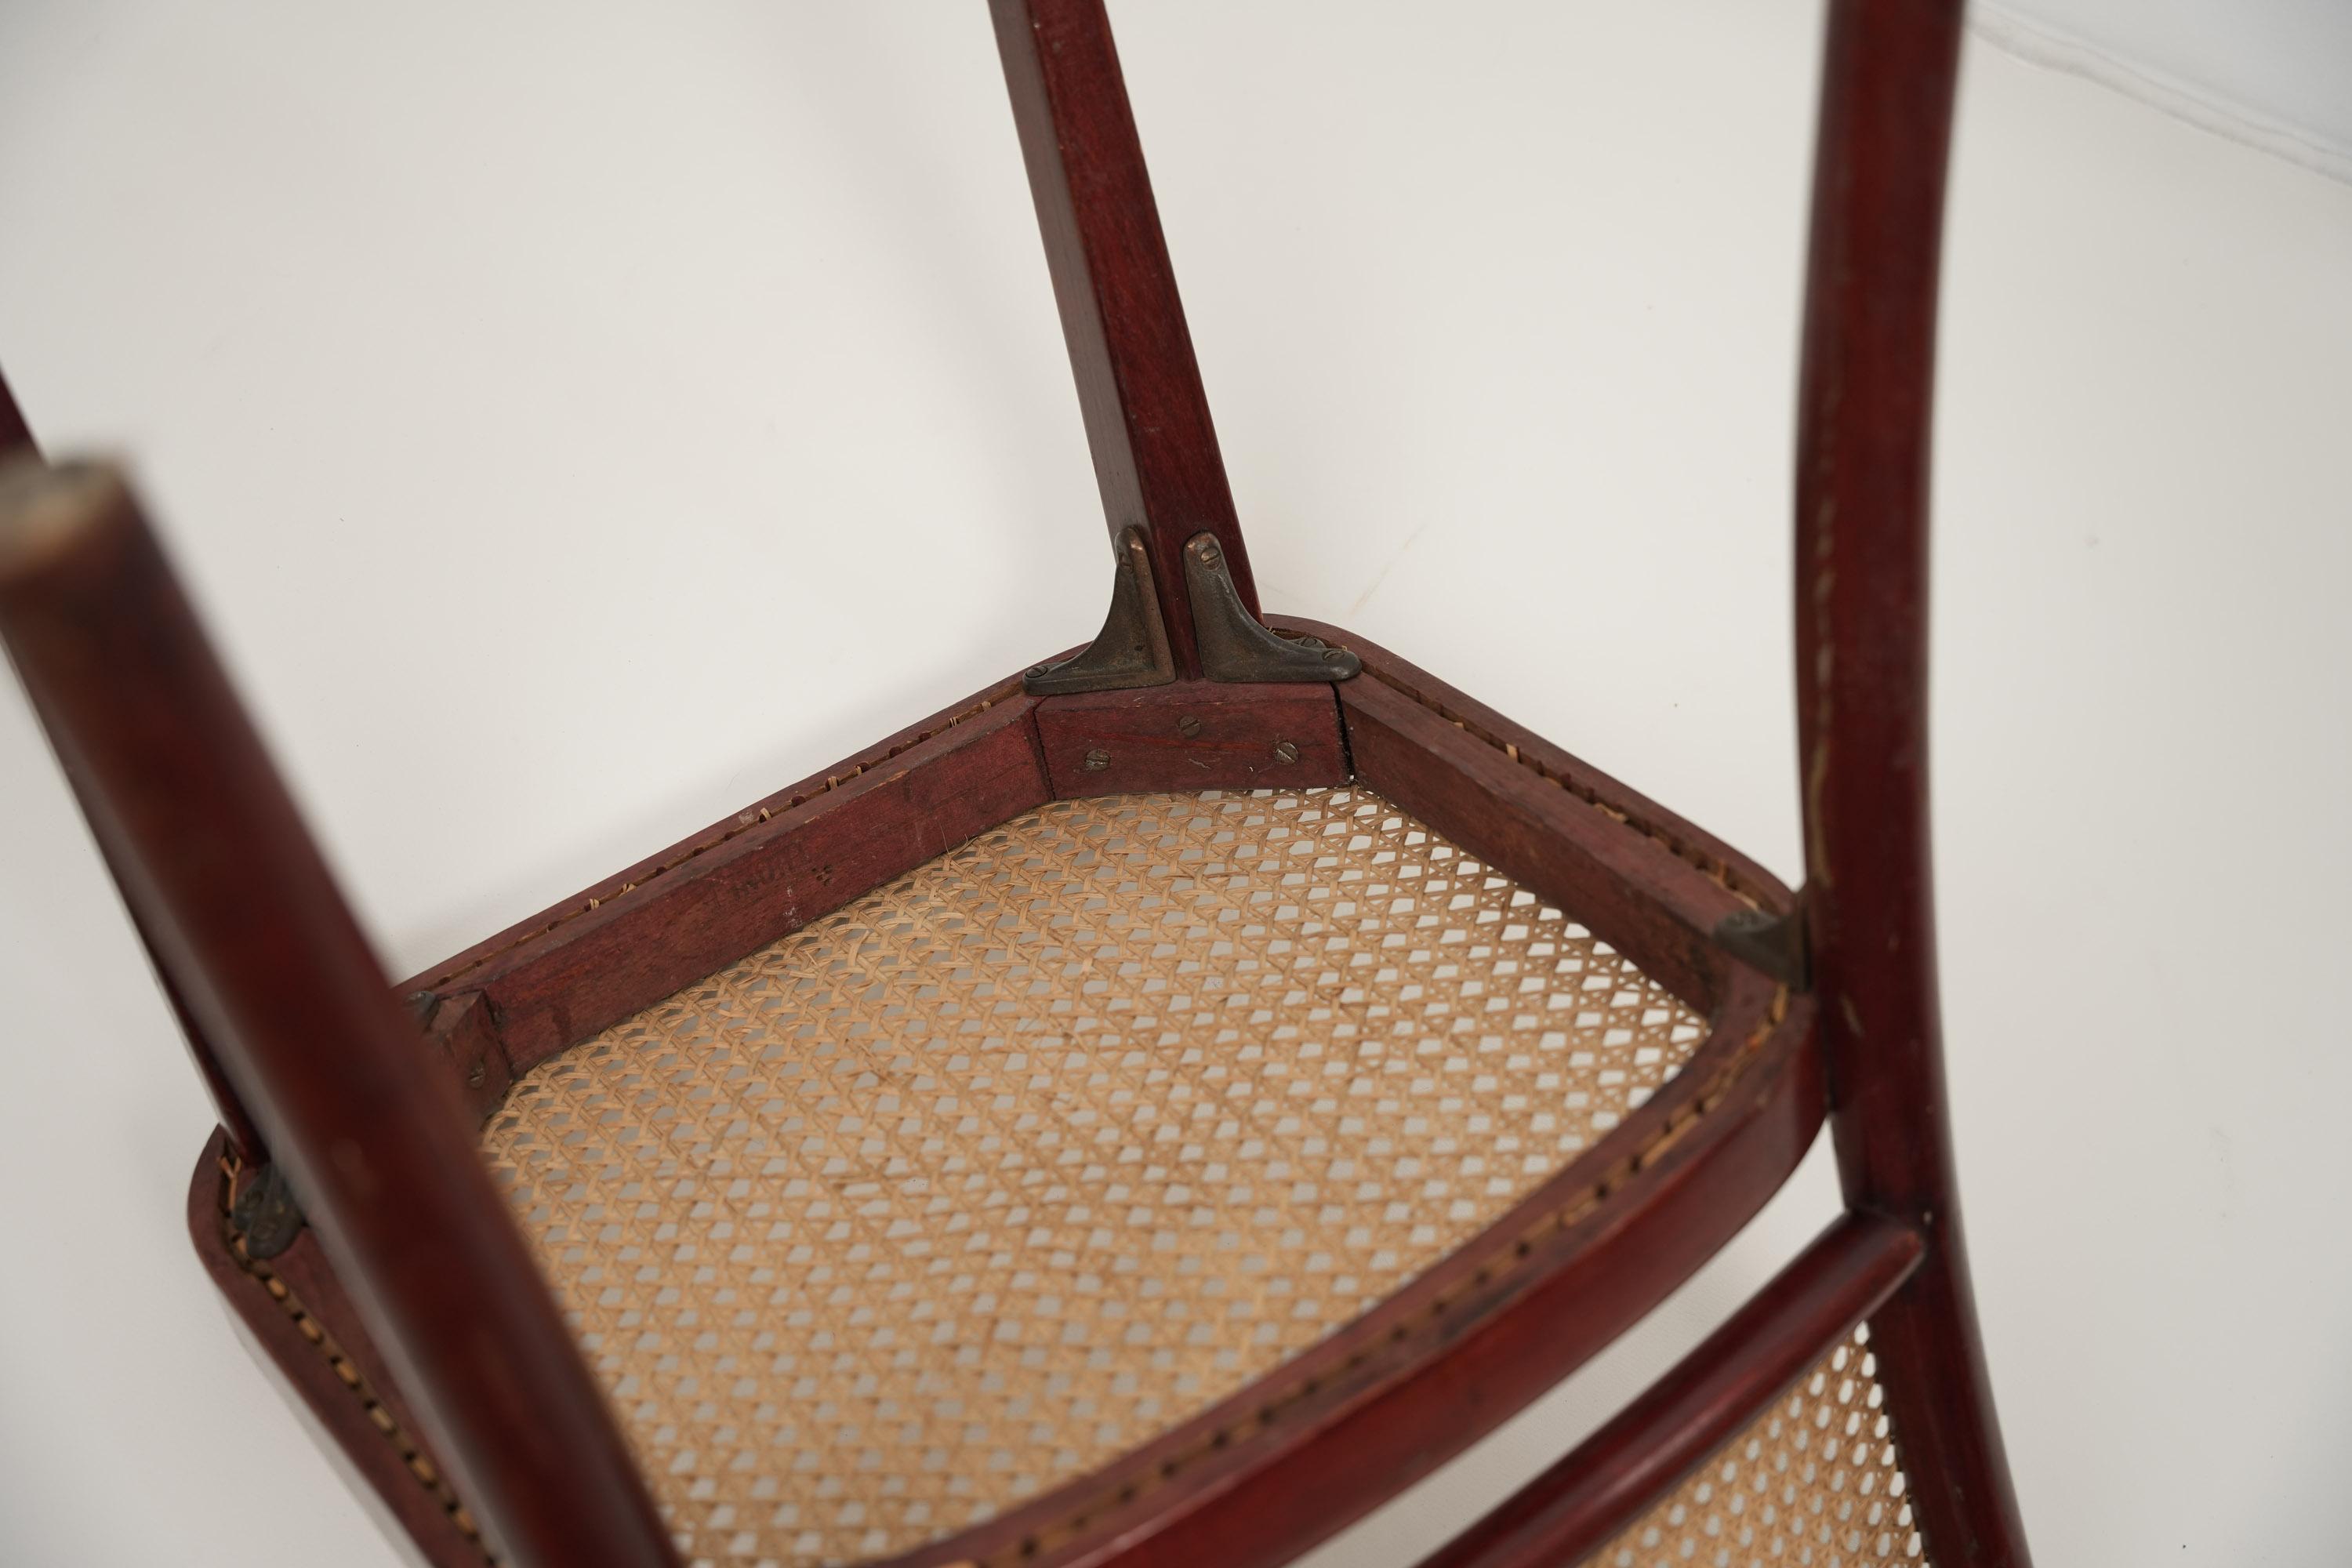 Early 20th Century A 811 Chair By Josef Hoffmann or Josef Frank for Thonet 1920s For Sale